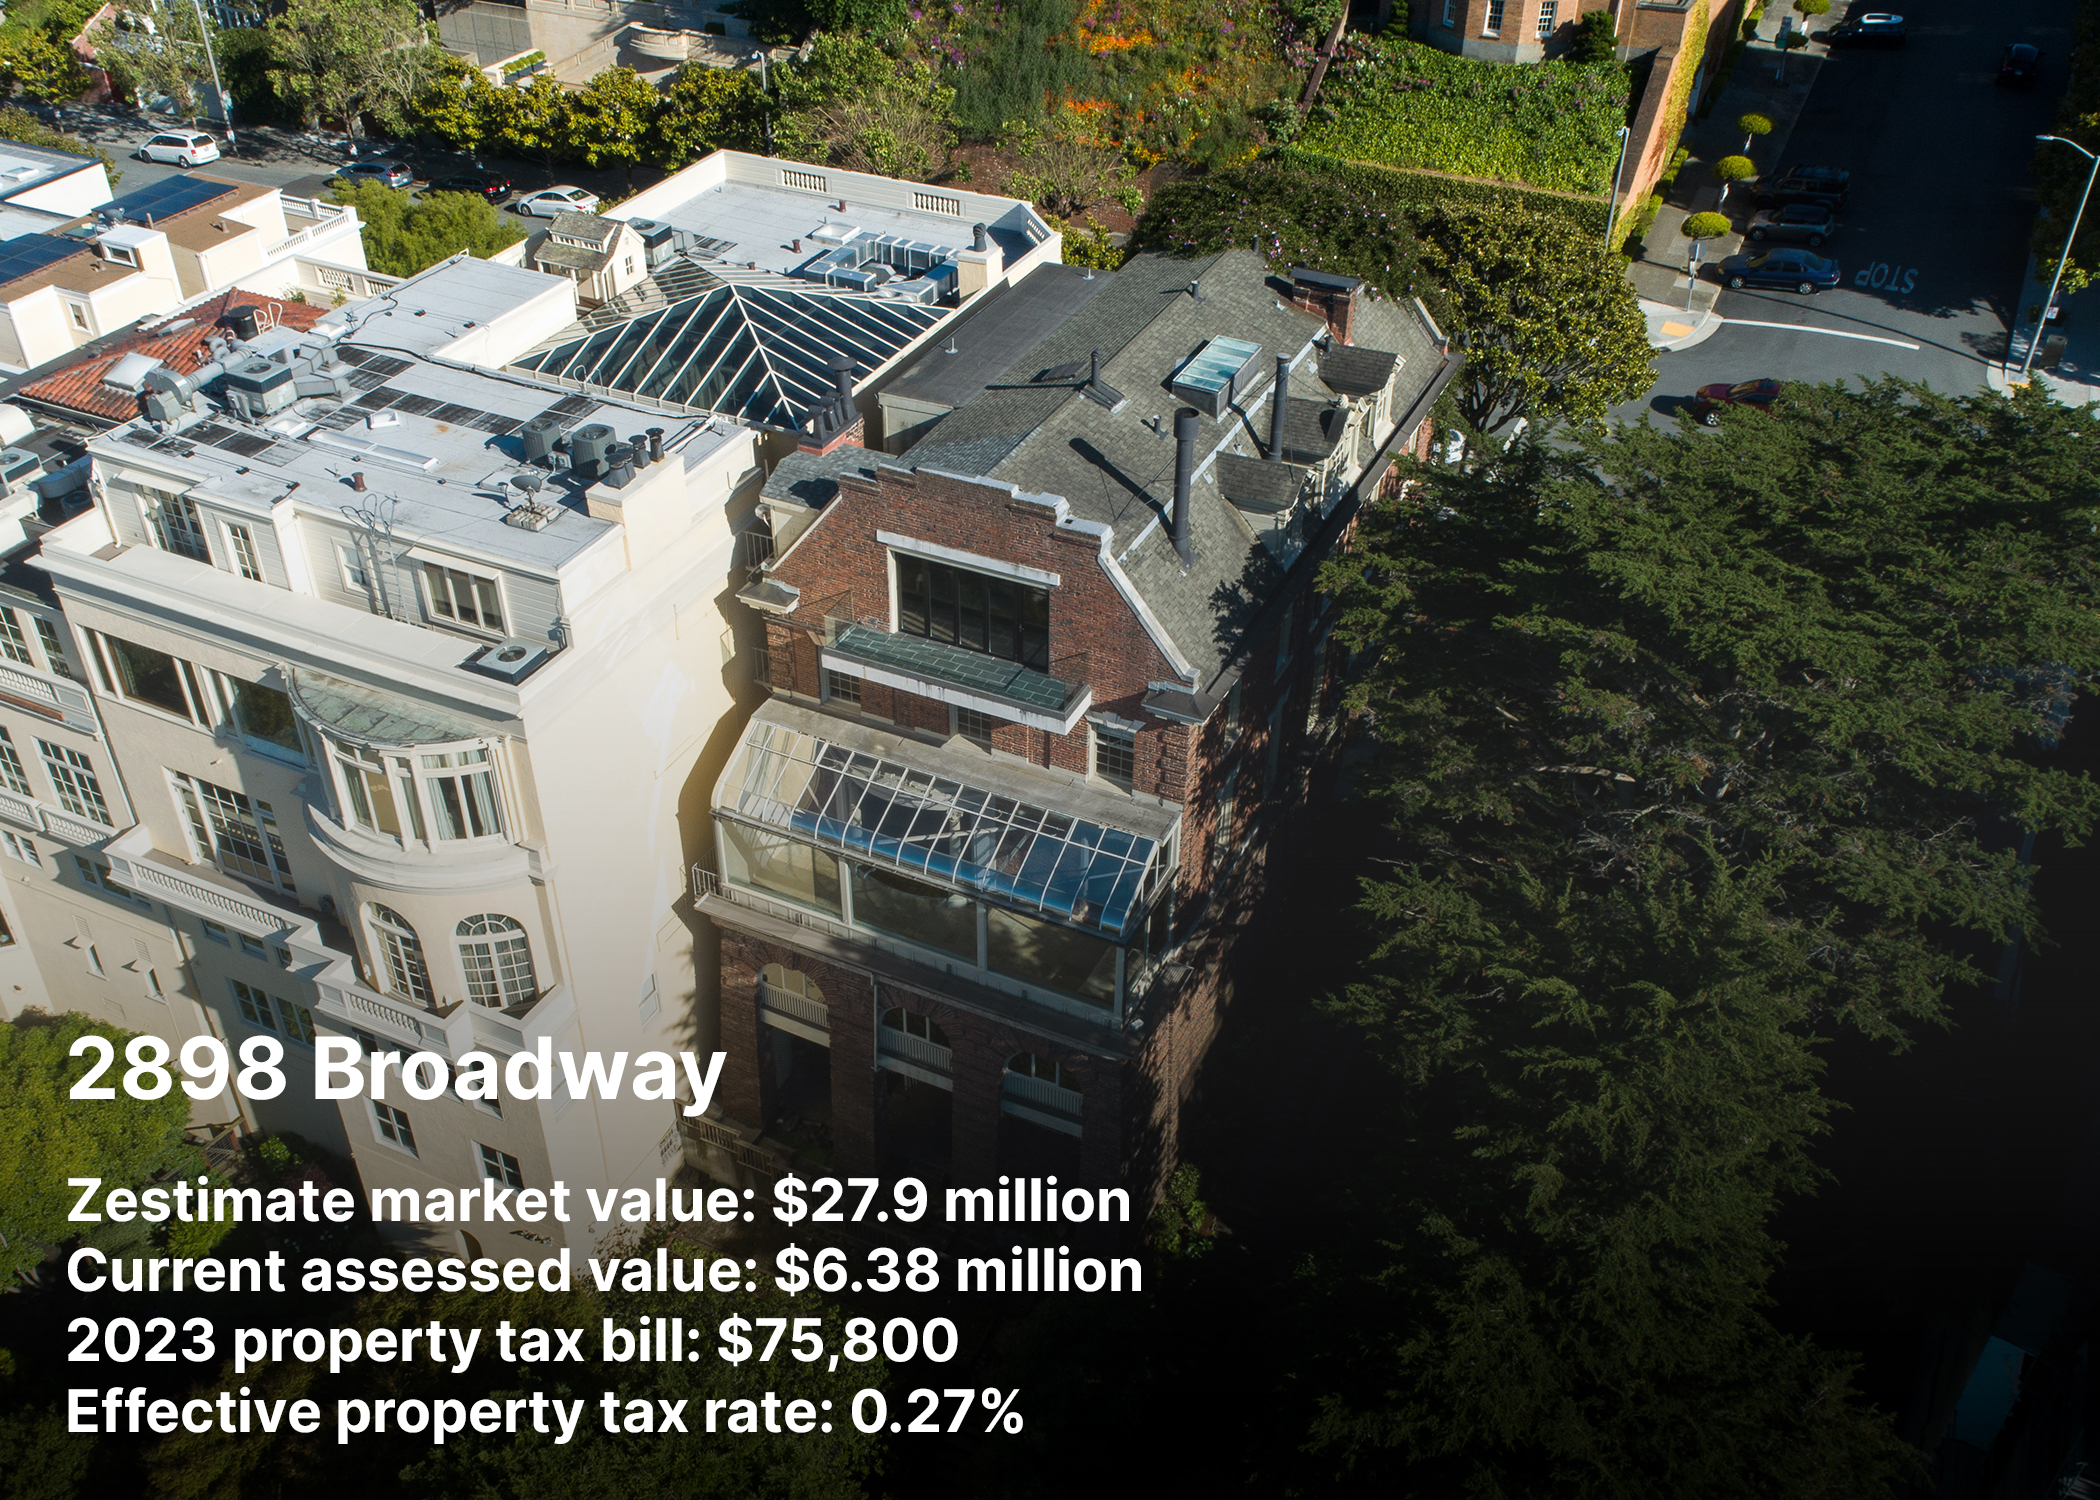 The image shows an aerial view of a luxury building at 2898 Broadway, with text overlay detailing its market and assessed values, property tax bill, and tax rate.